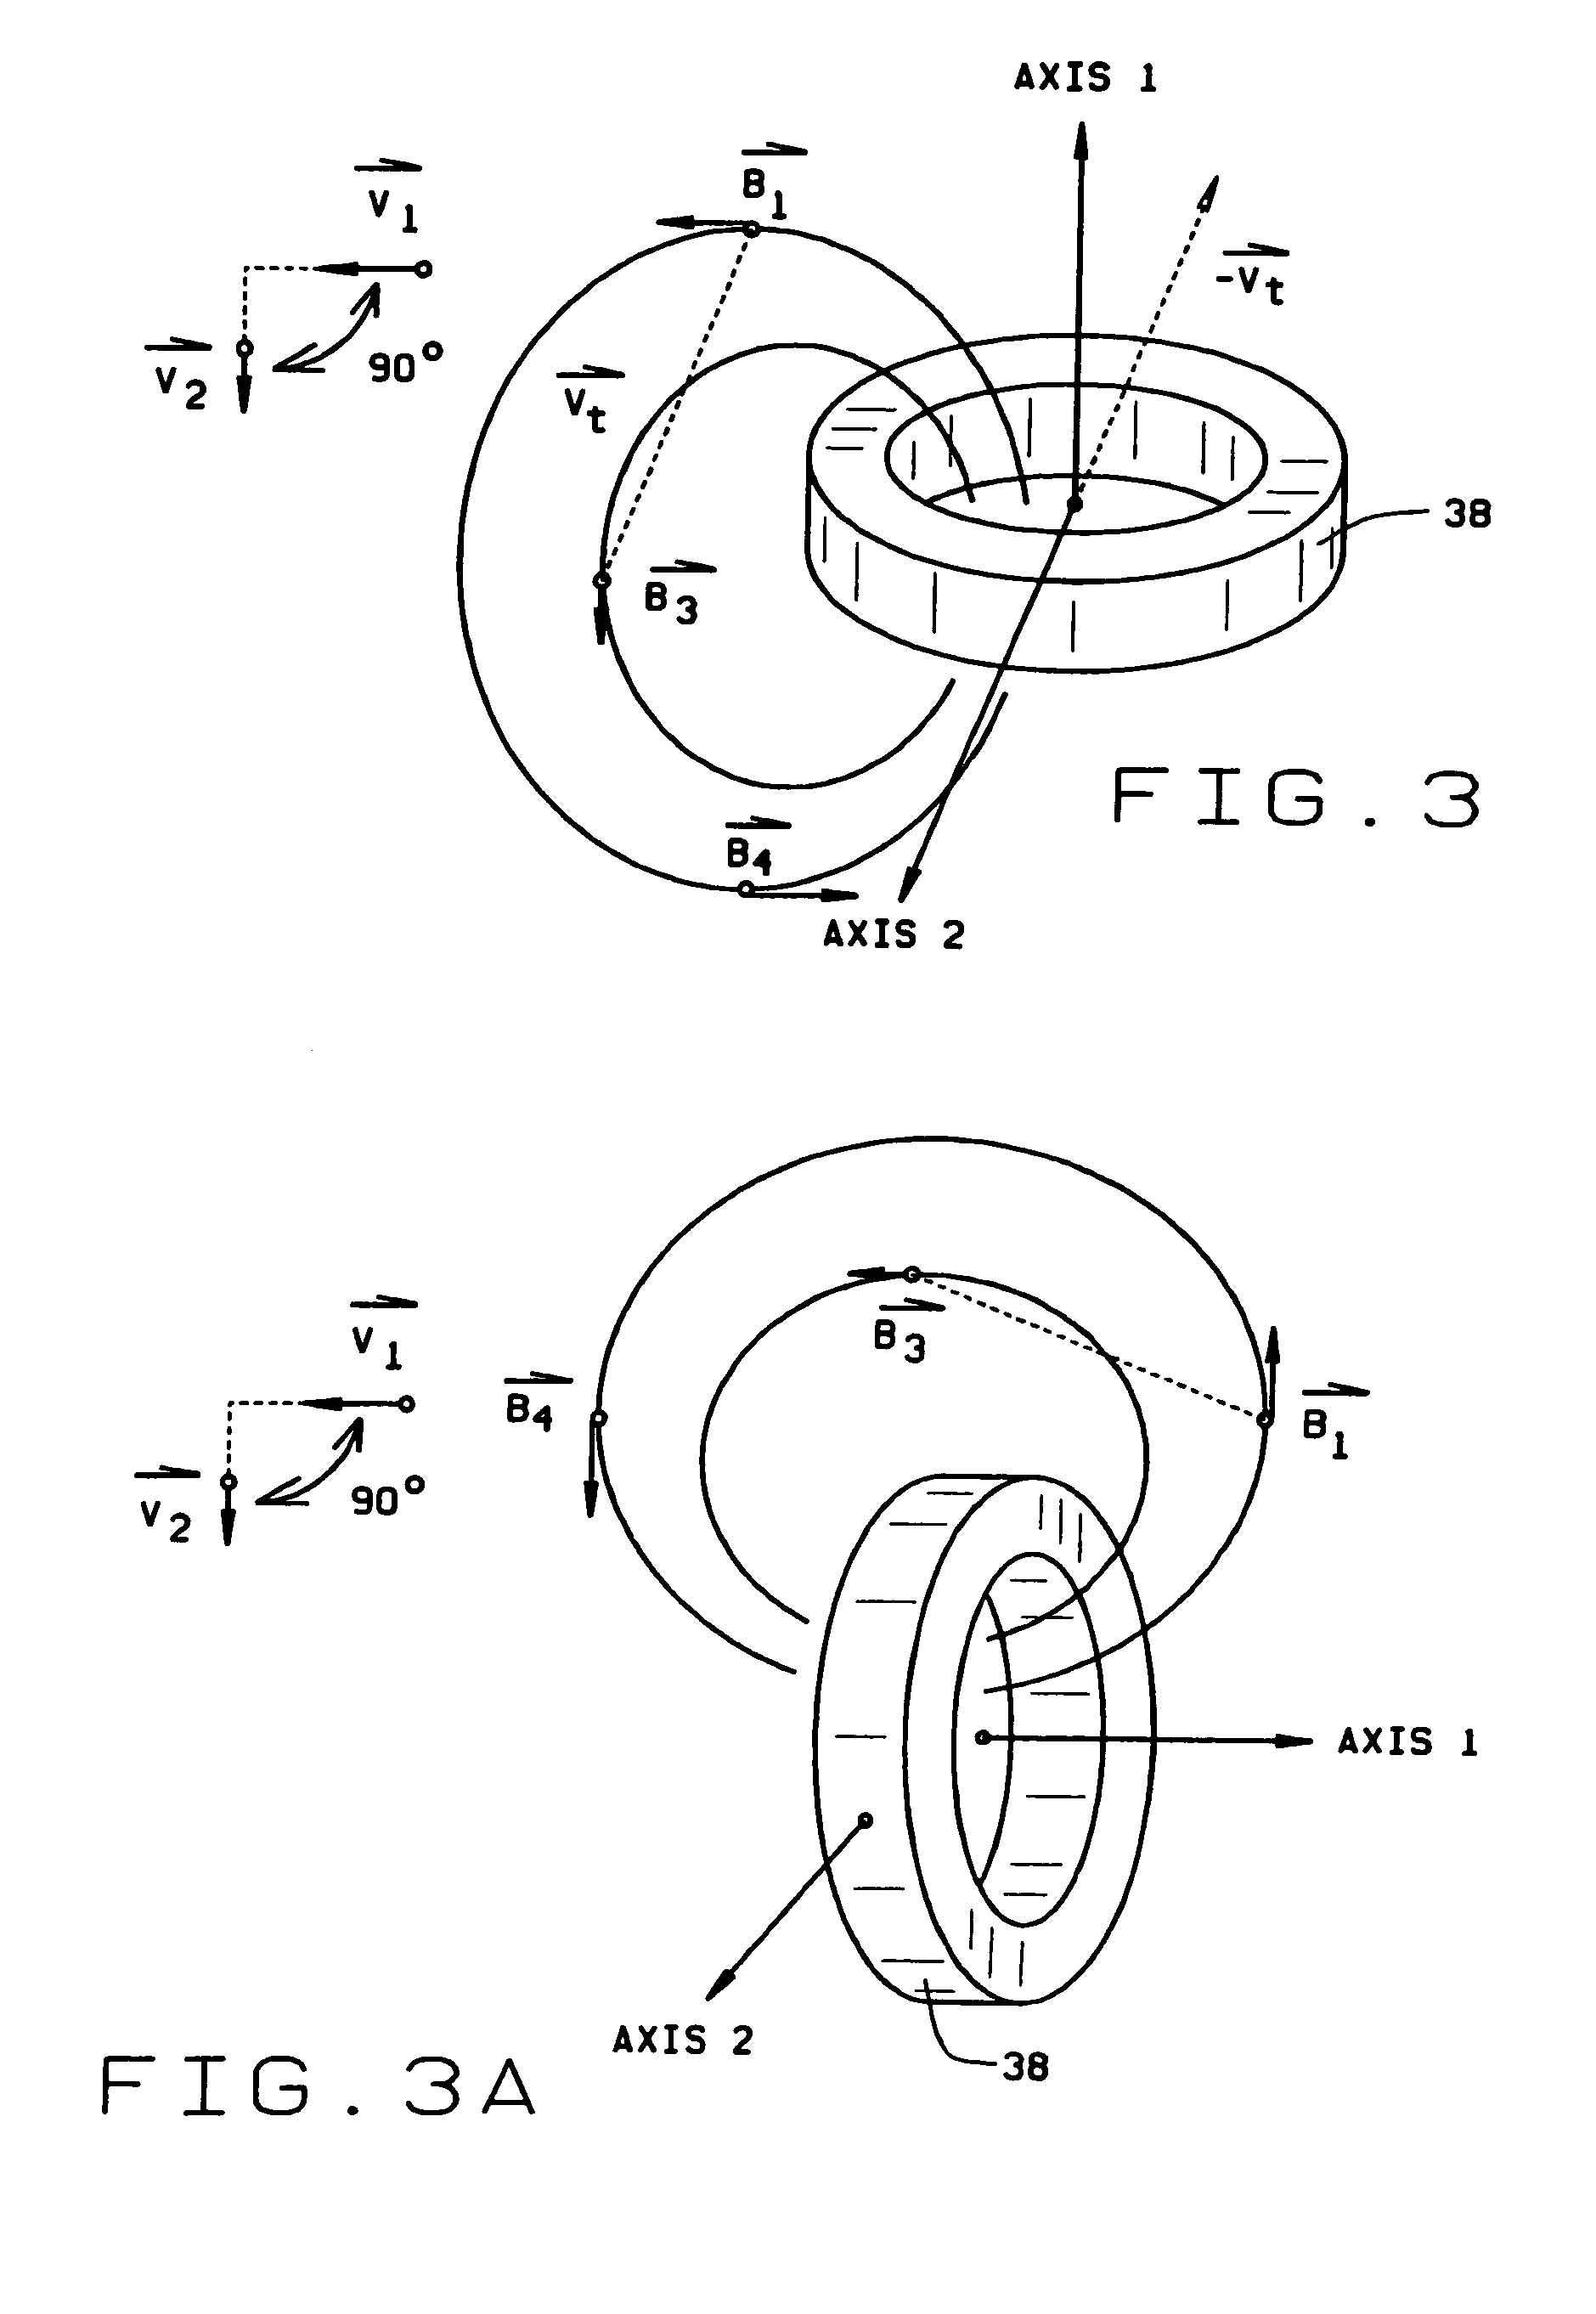 Method for safely and efficiently navigating magnetic devices in the body